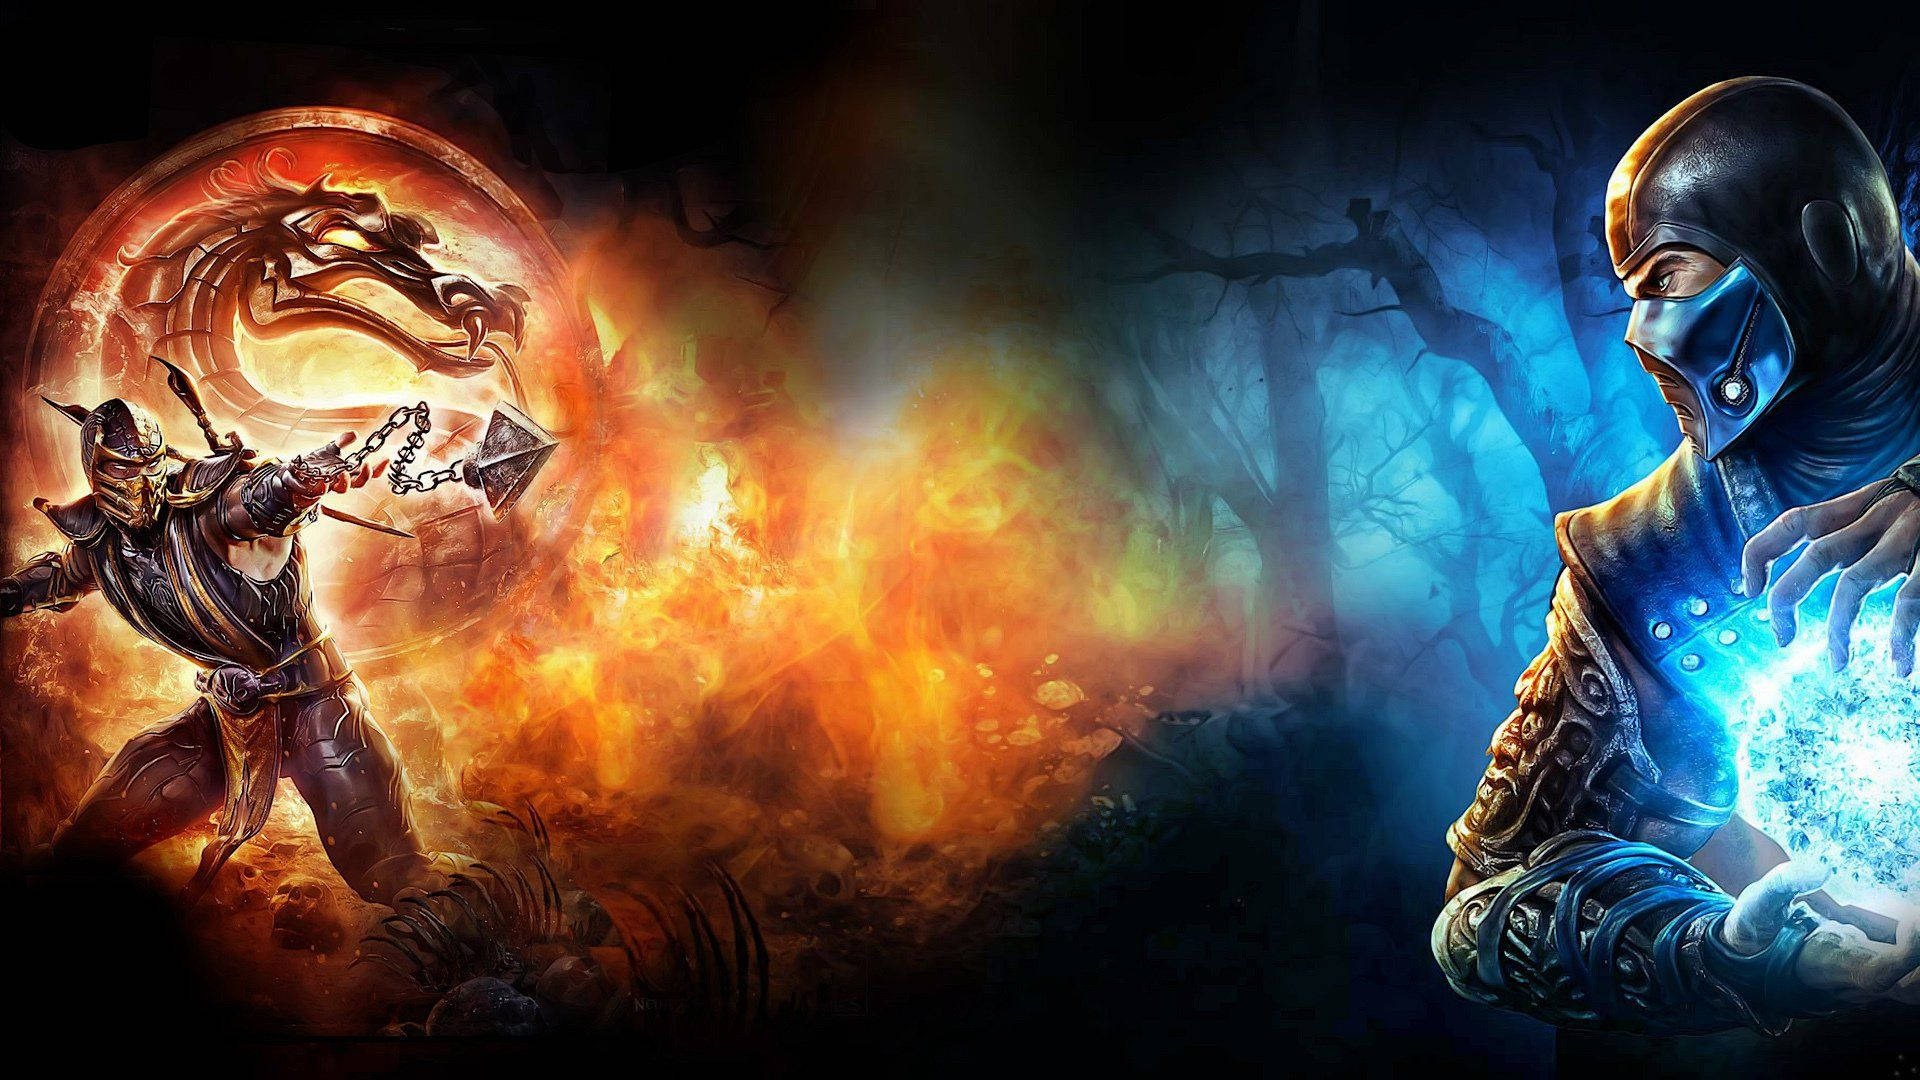 "The rivalries of Mortal Kombat are a battle to the death." Wallpaper